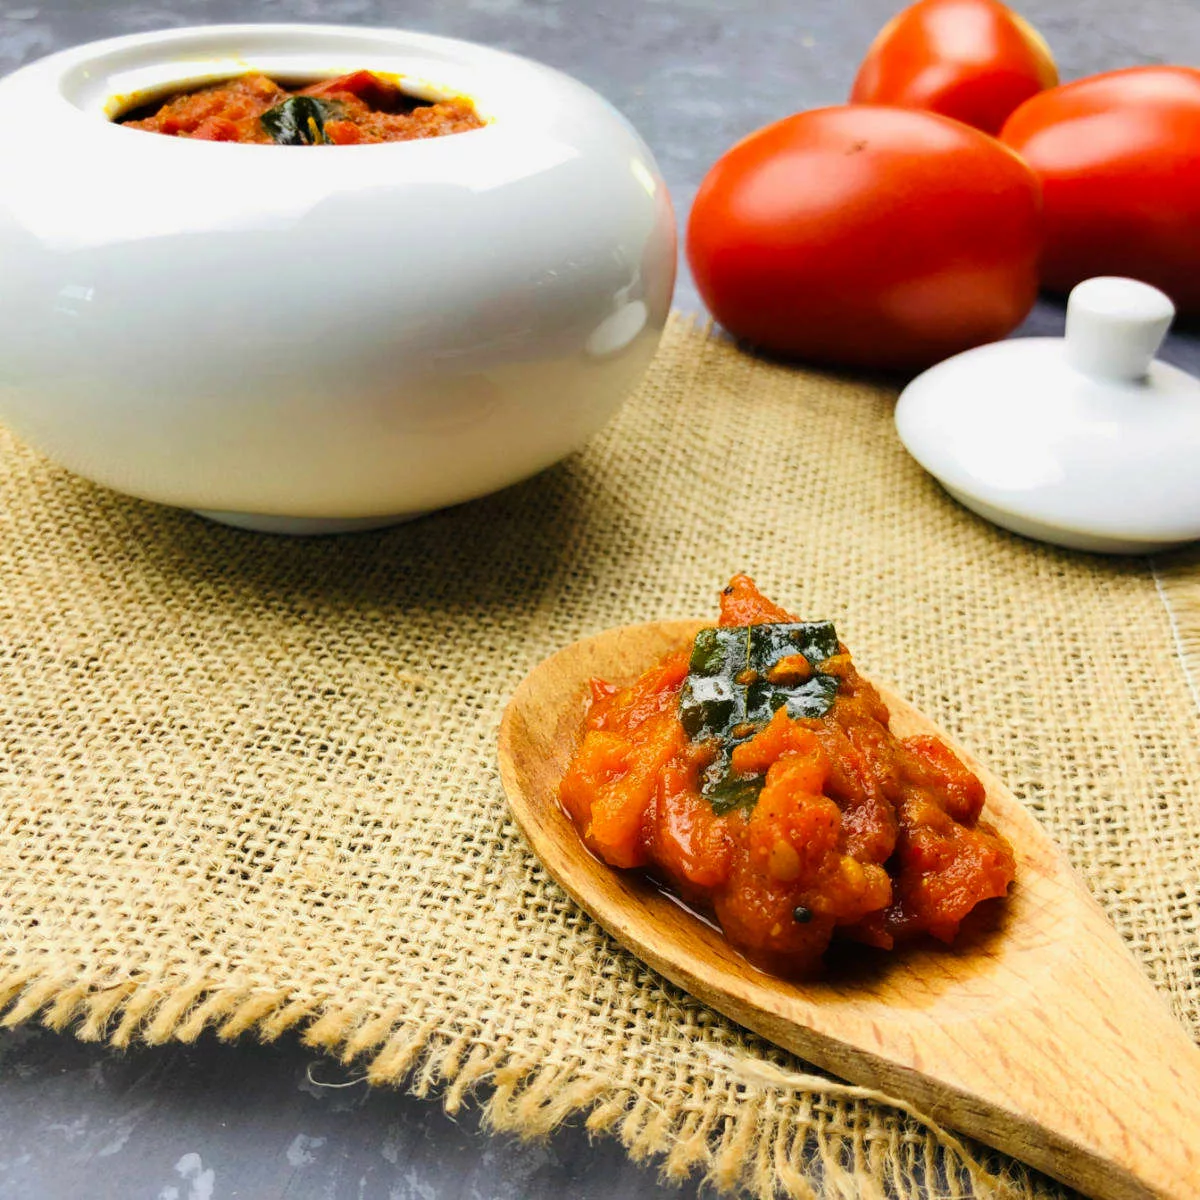 Tomato pickle placed on wooden serving spoon.